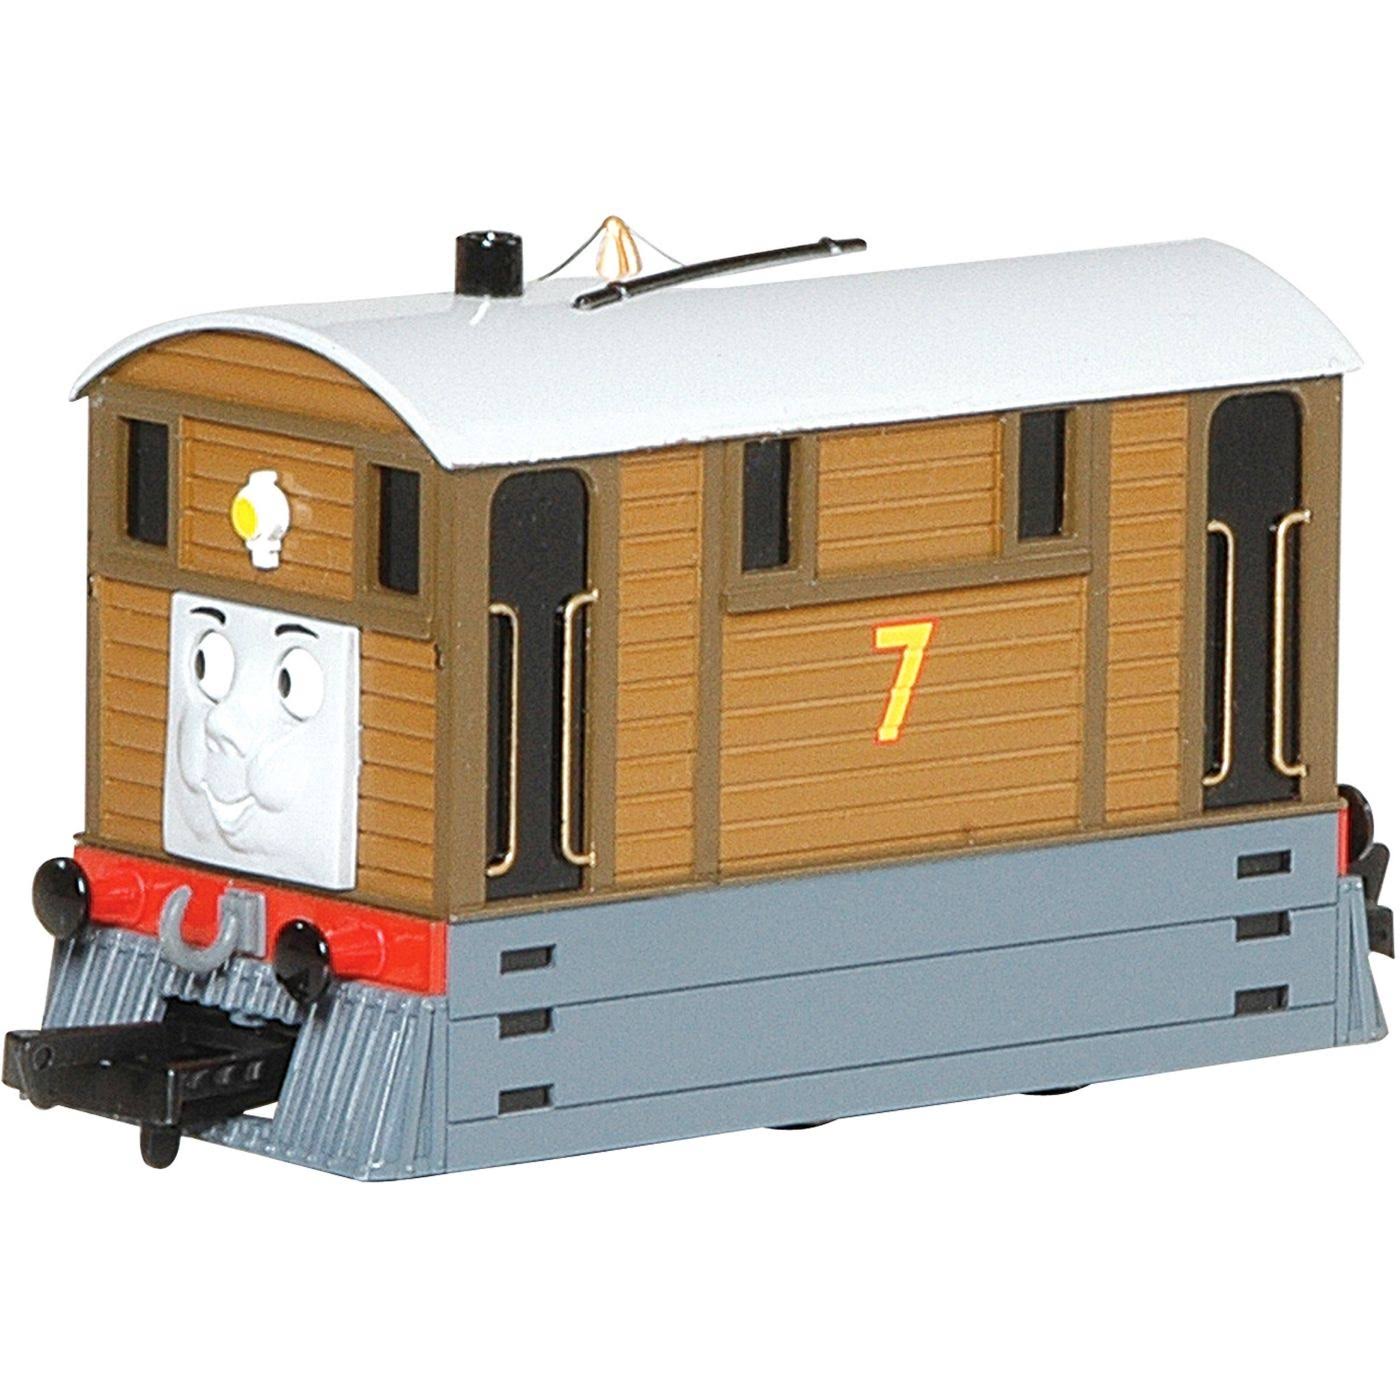 Bachmann Thomas and Friends Toby The Tram Engine Locomotive with Moving Eyes, HO Scale Train